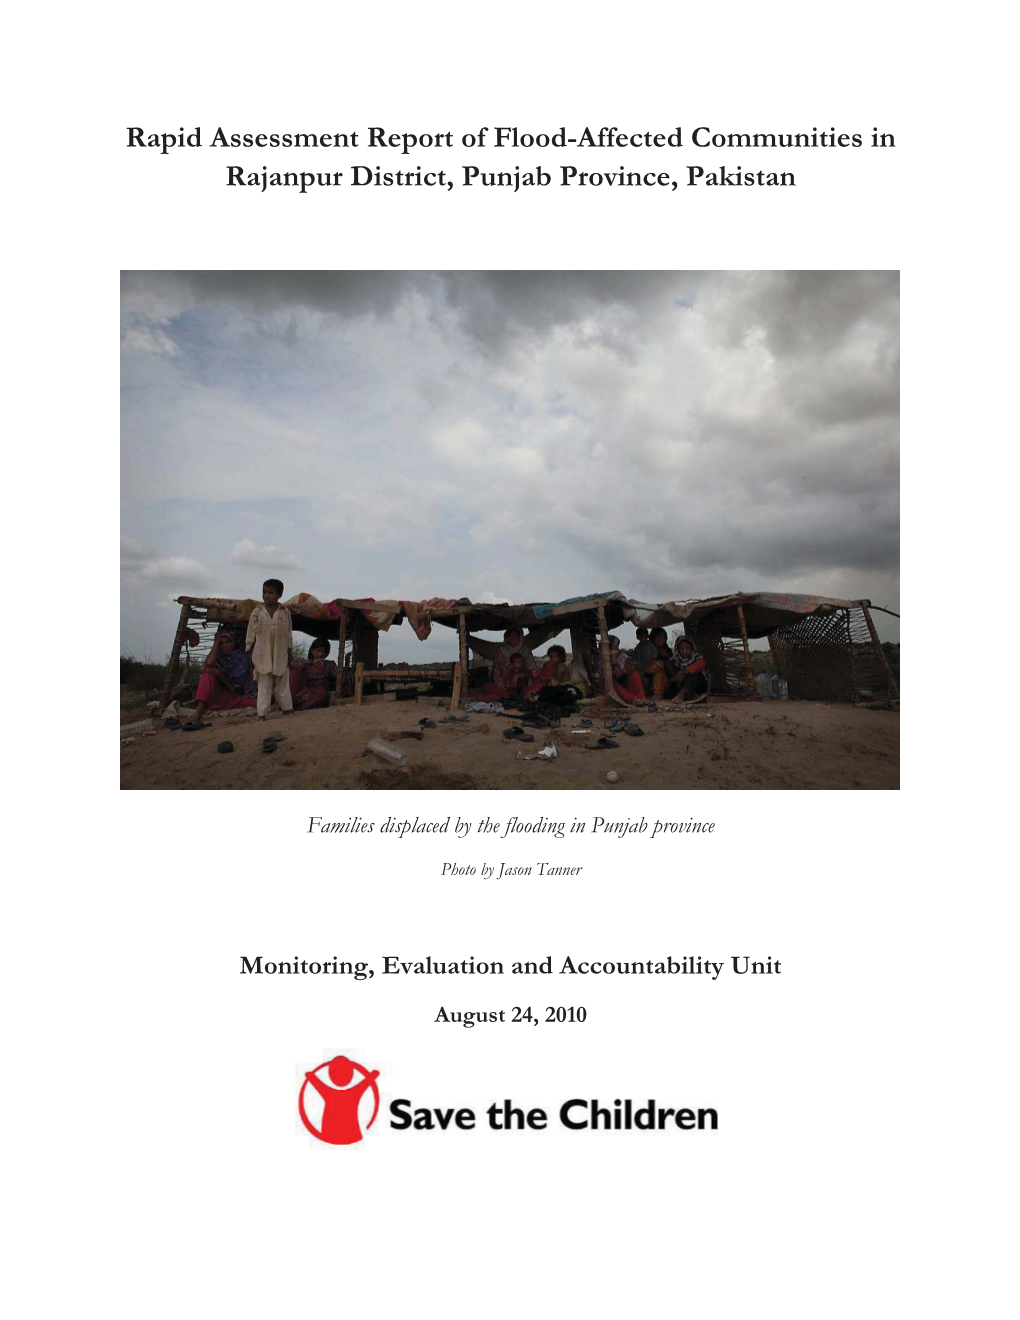 Rapid Assessment Report of Flood-Affected Communities in Rajanpur District, Punjab Province, Pakistan